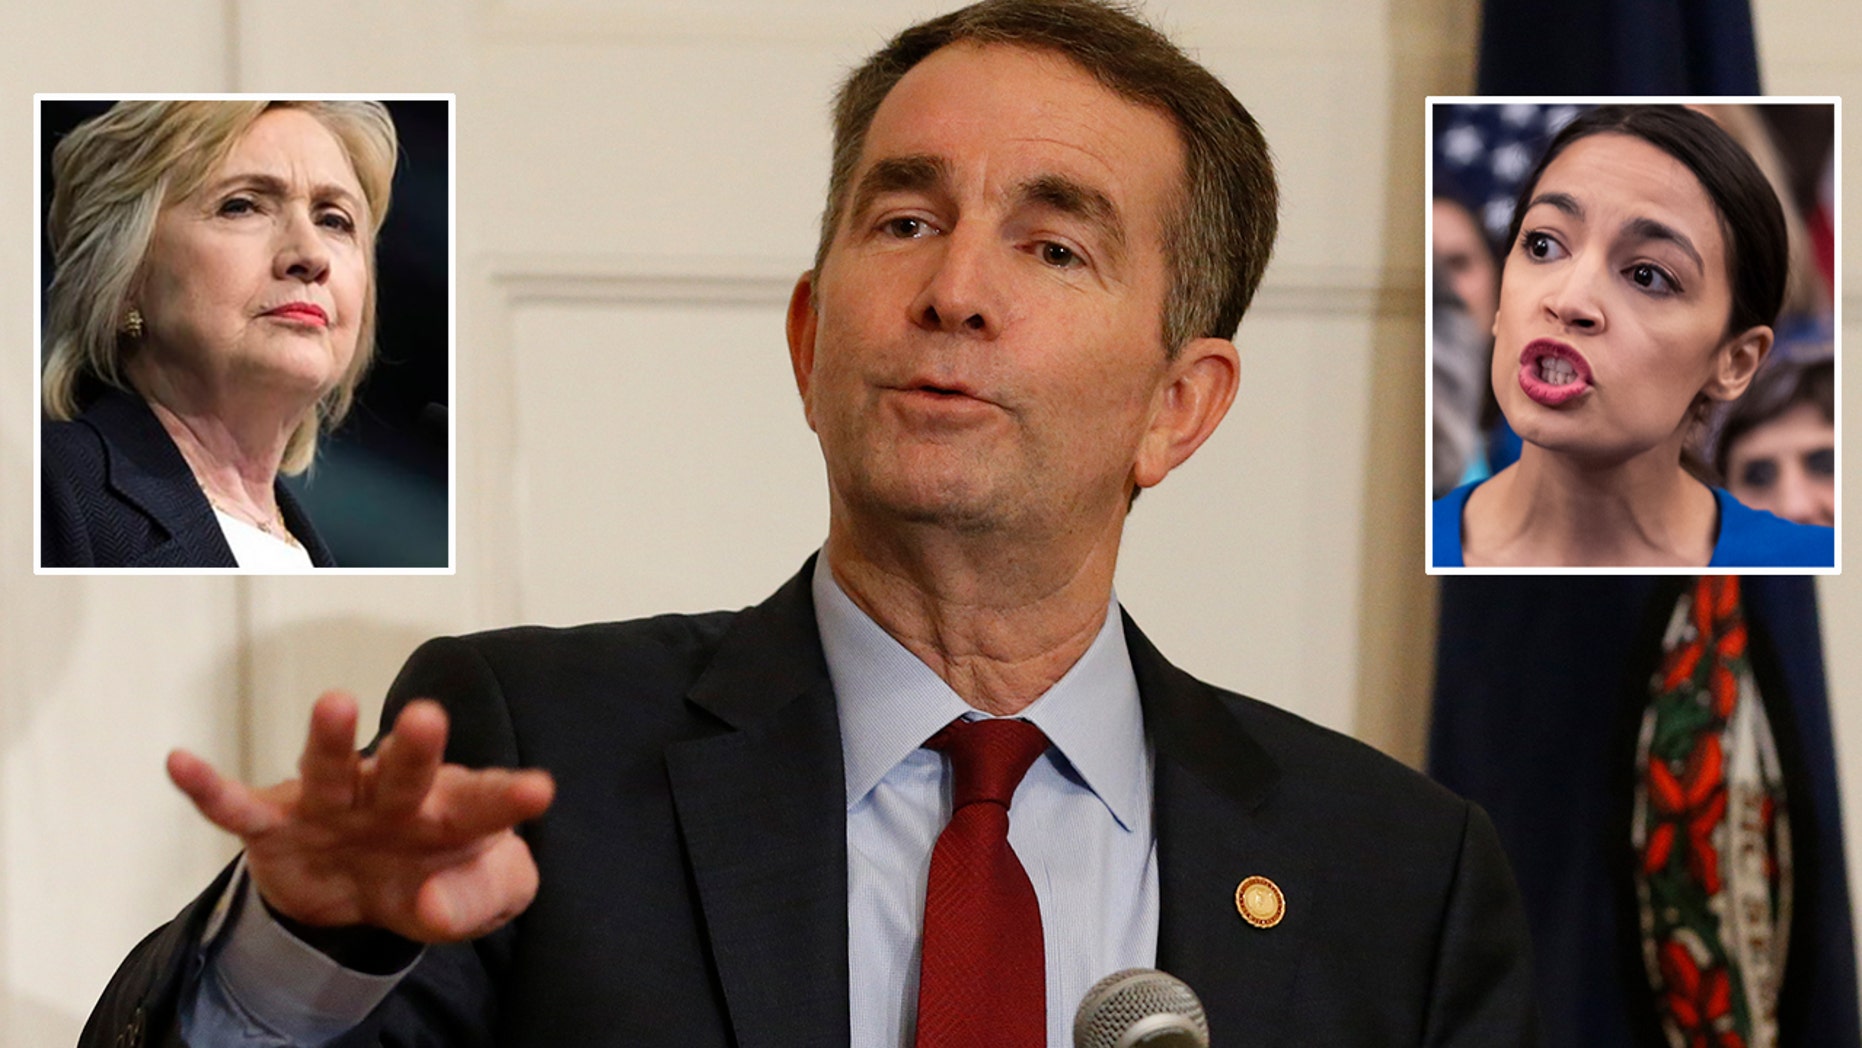 Clinton, Ocasio-Cortez join Dem chorus calling for Northam to resign; medical school vows review of past yearbooks